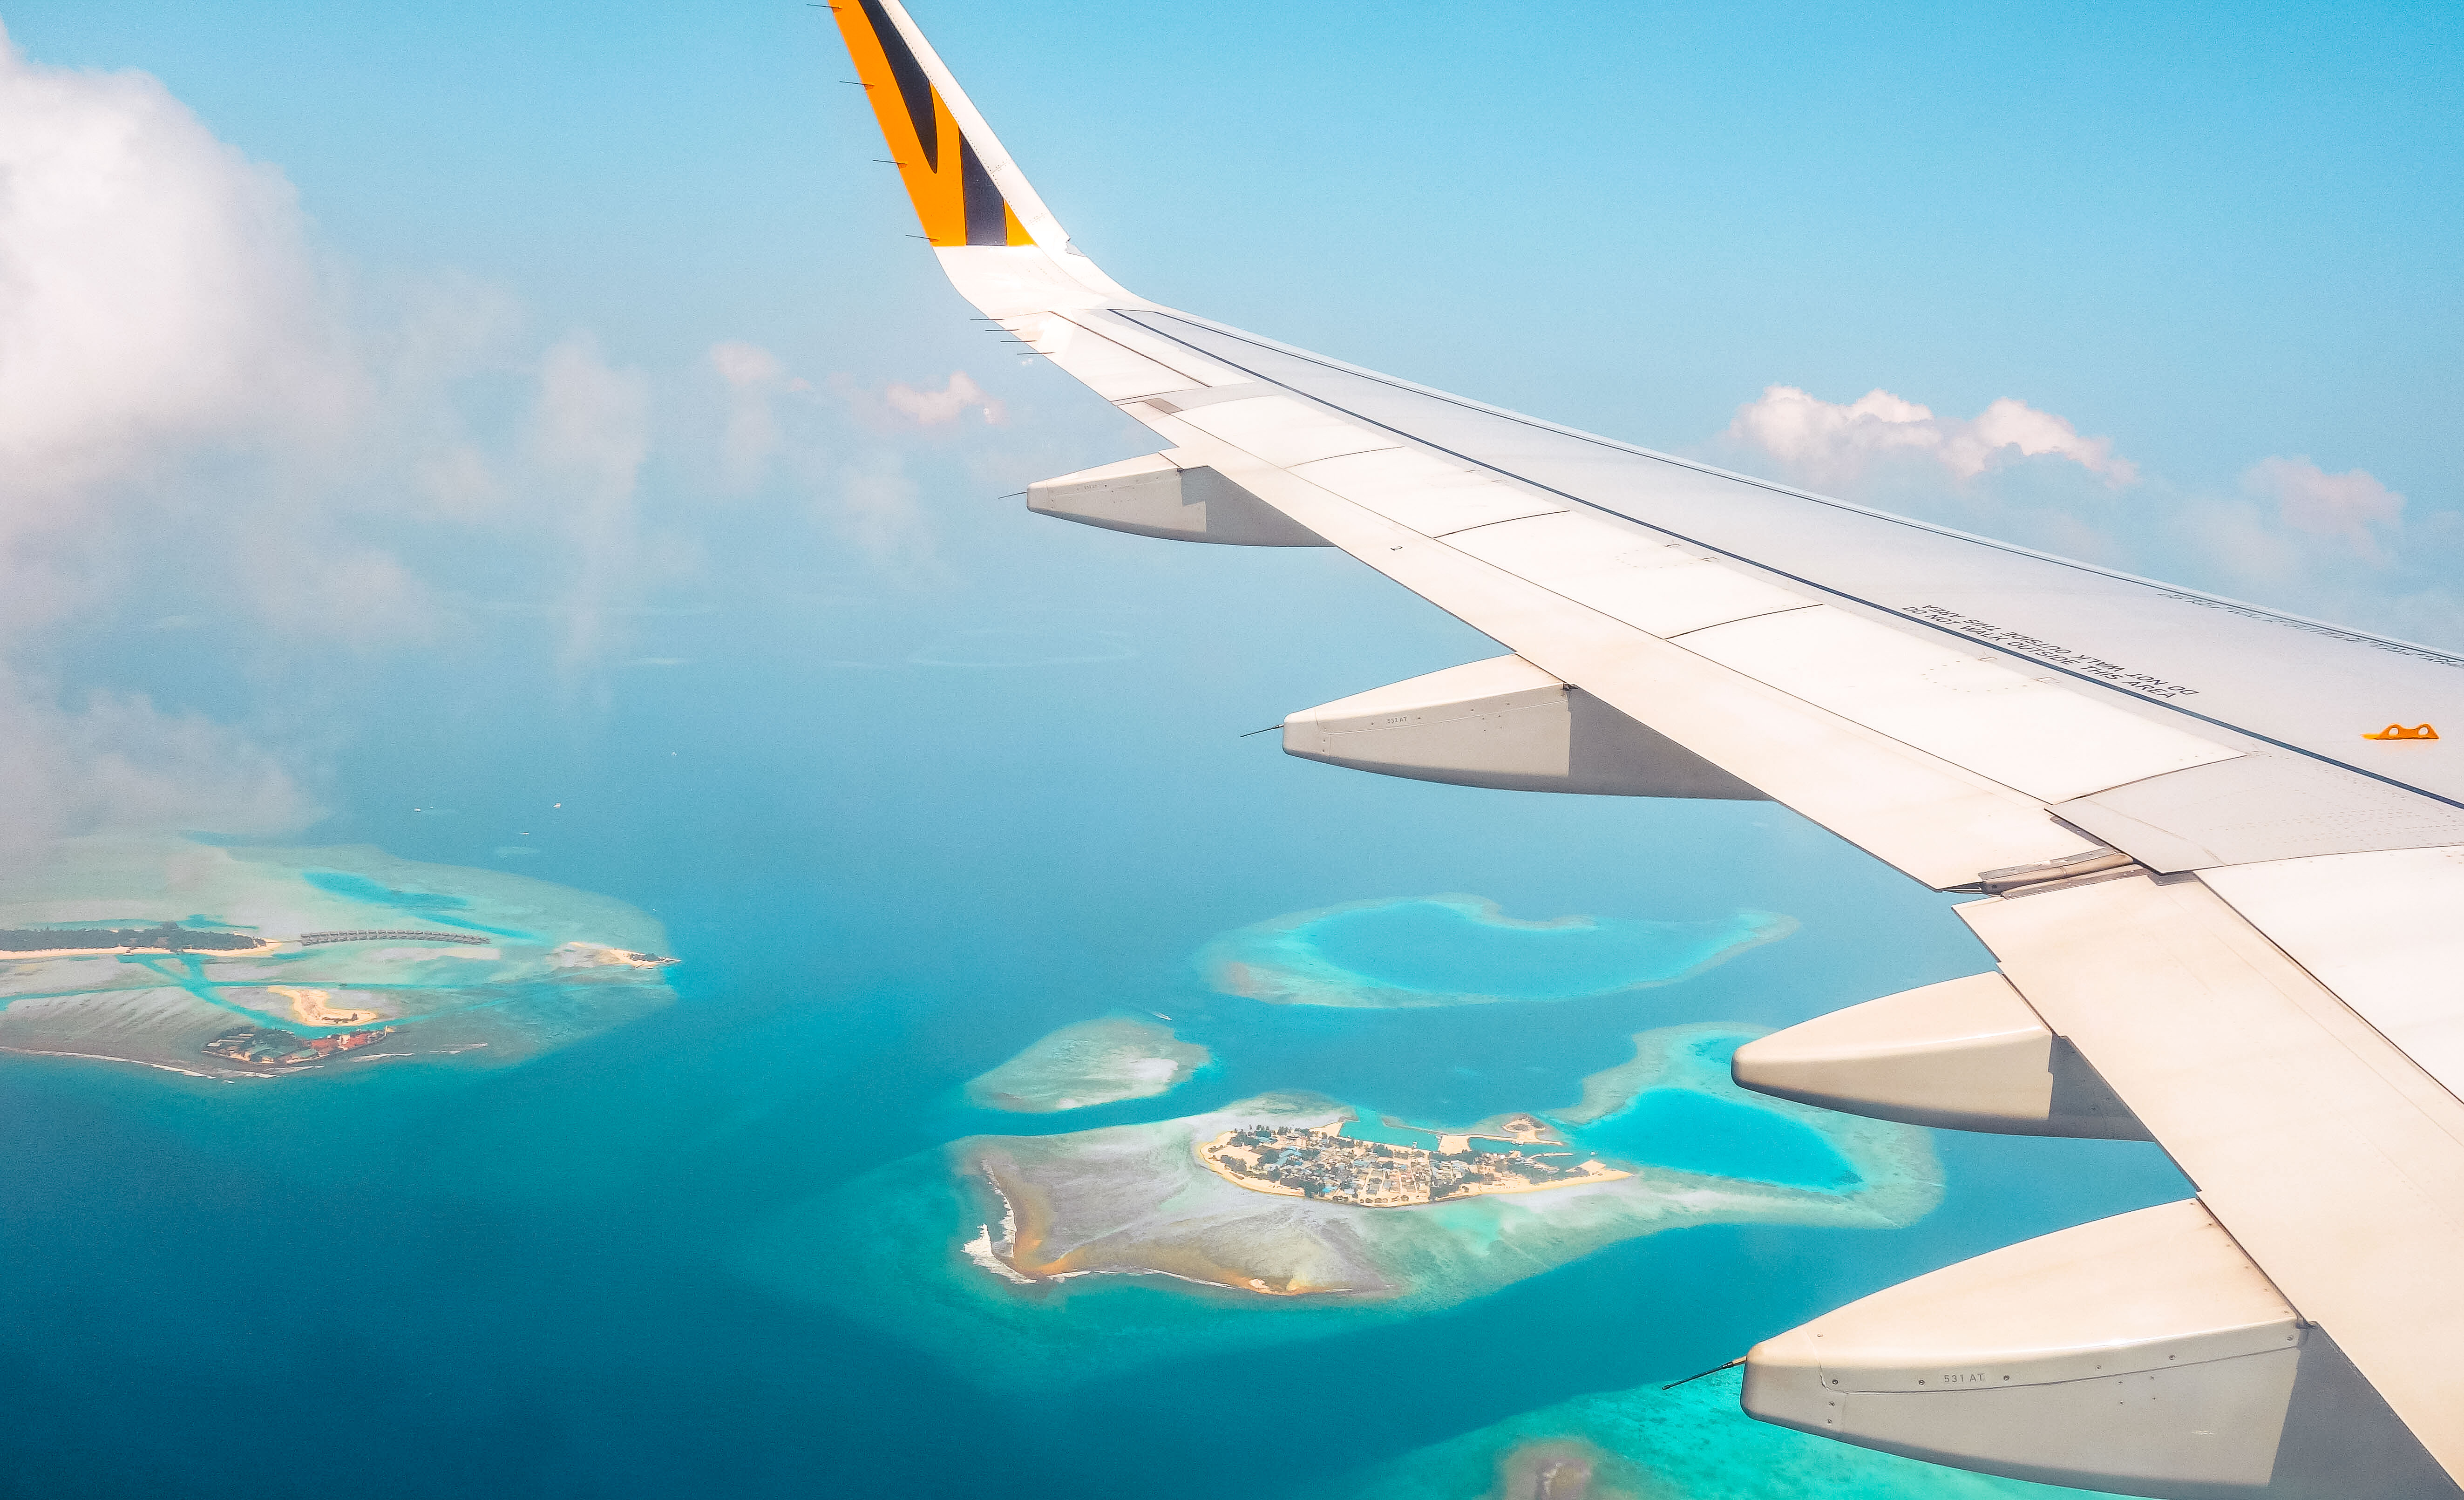 maldives from the plane view1.jpg